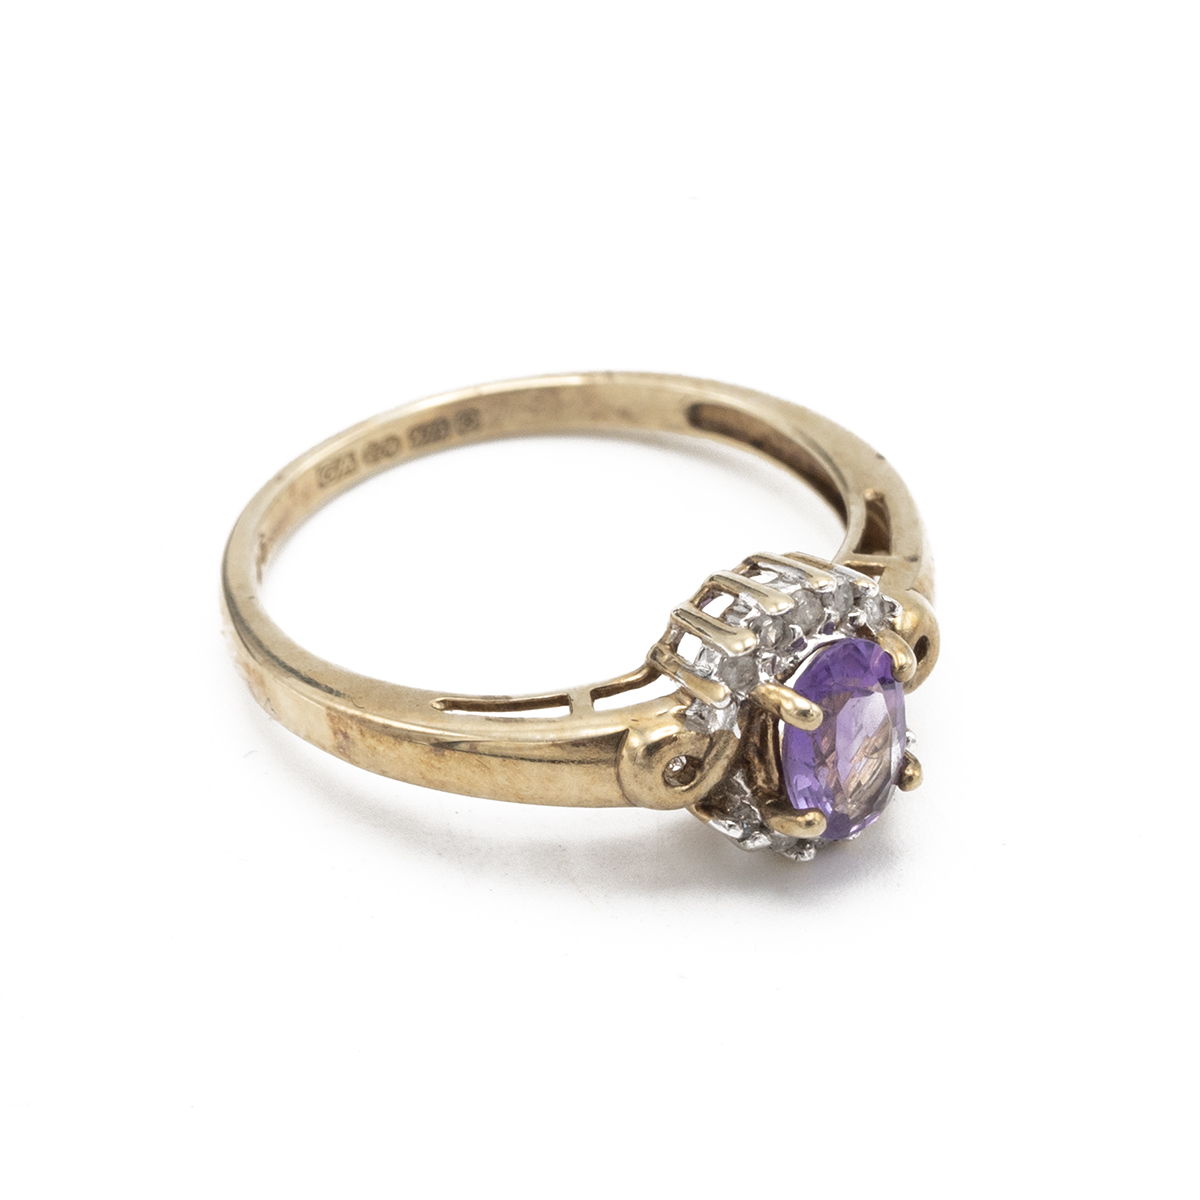 9ct gold ring, set with central amethyst, surrounded by 10 moissanite set stones. Size N1/2. - Image 2 of 4